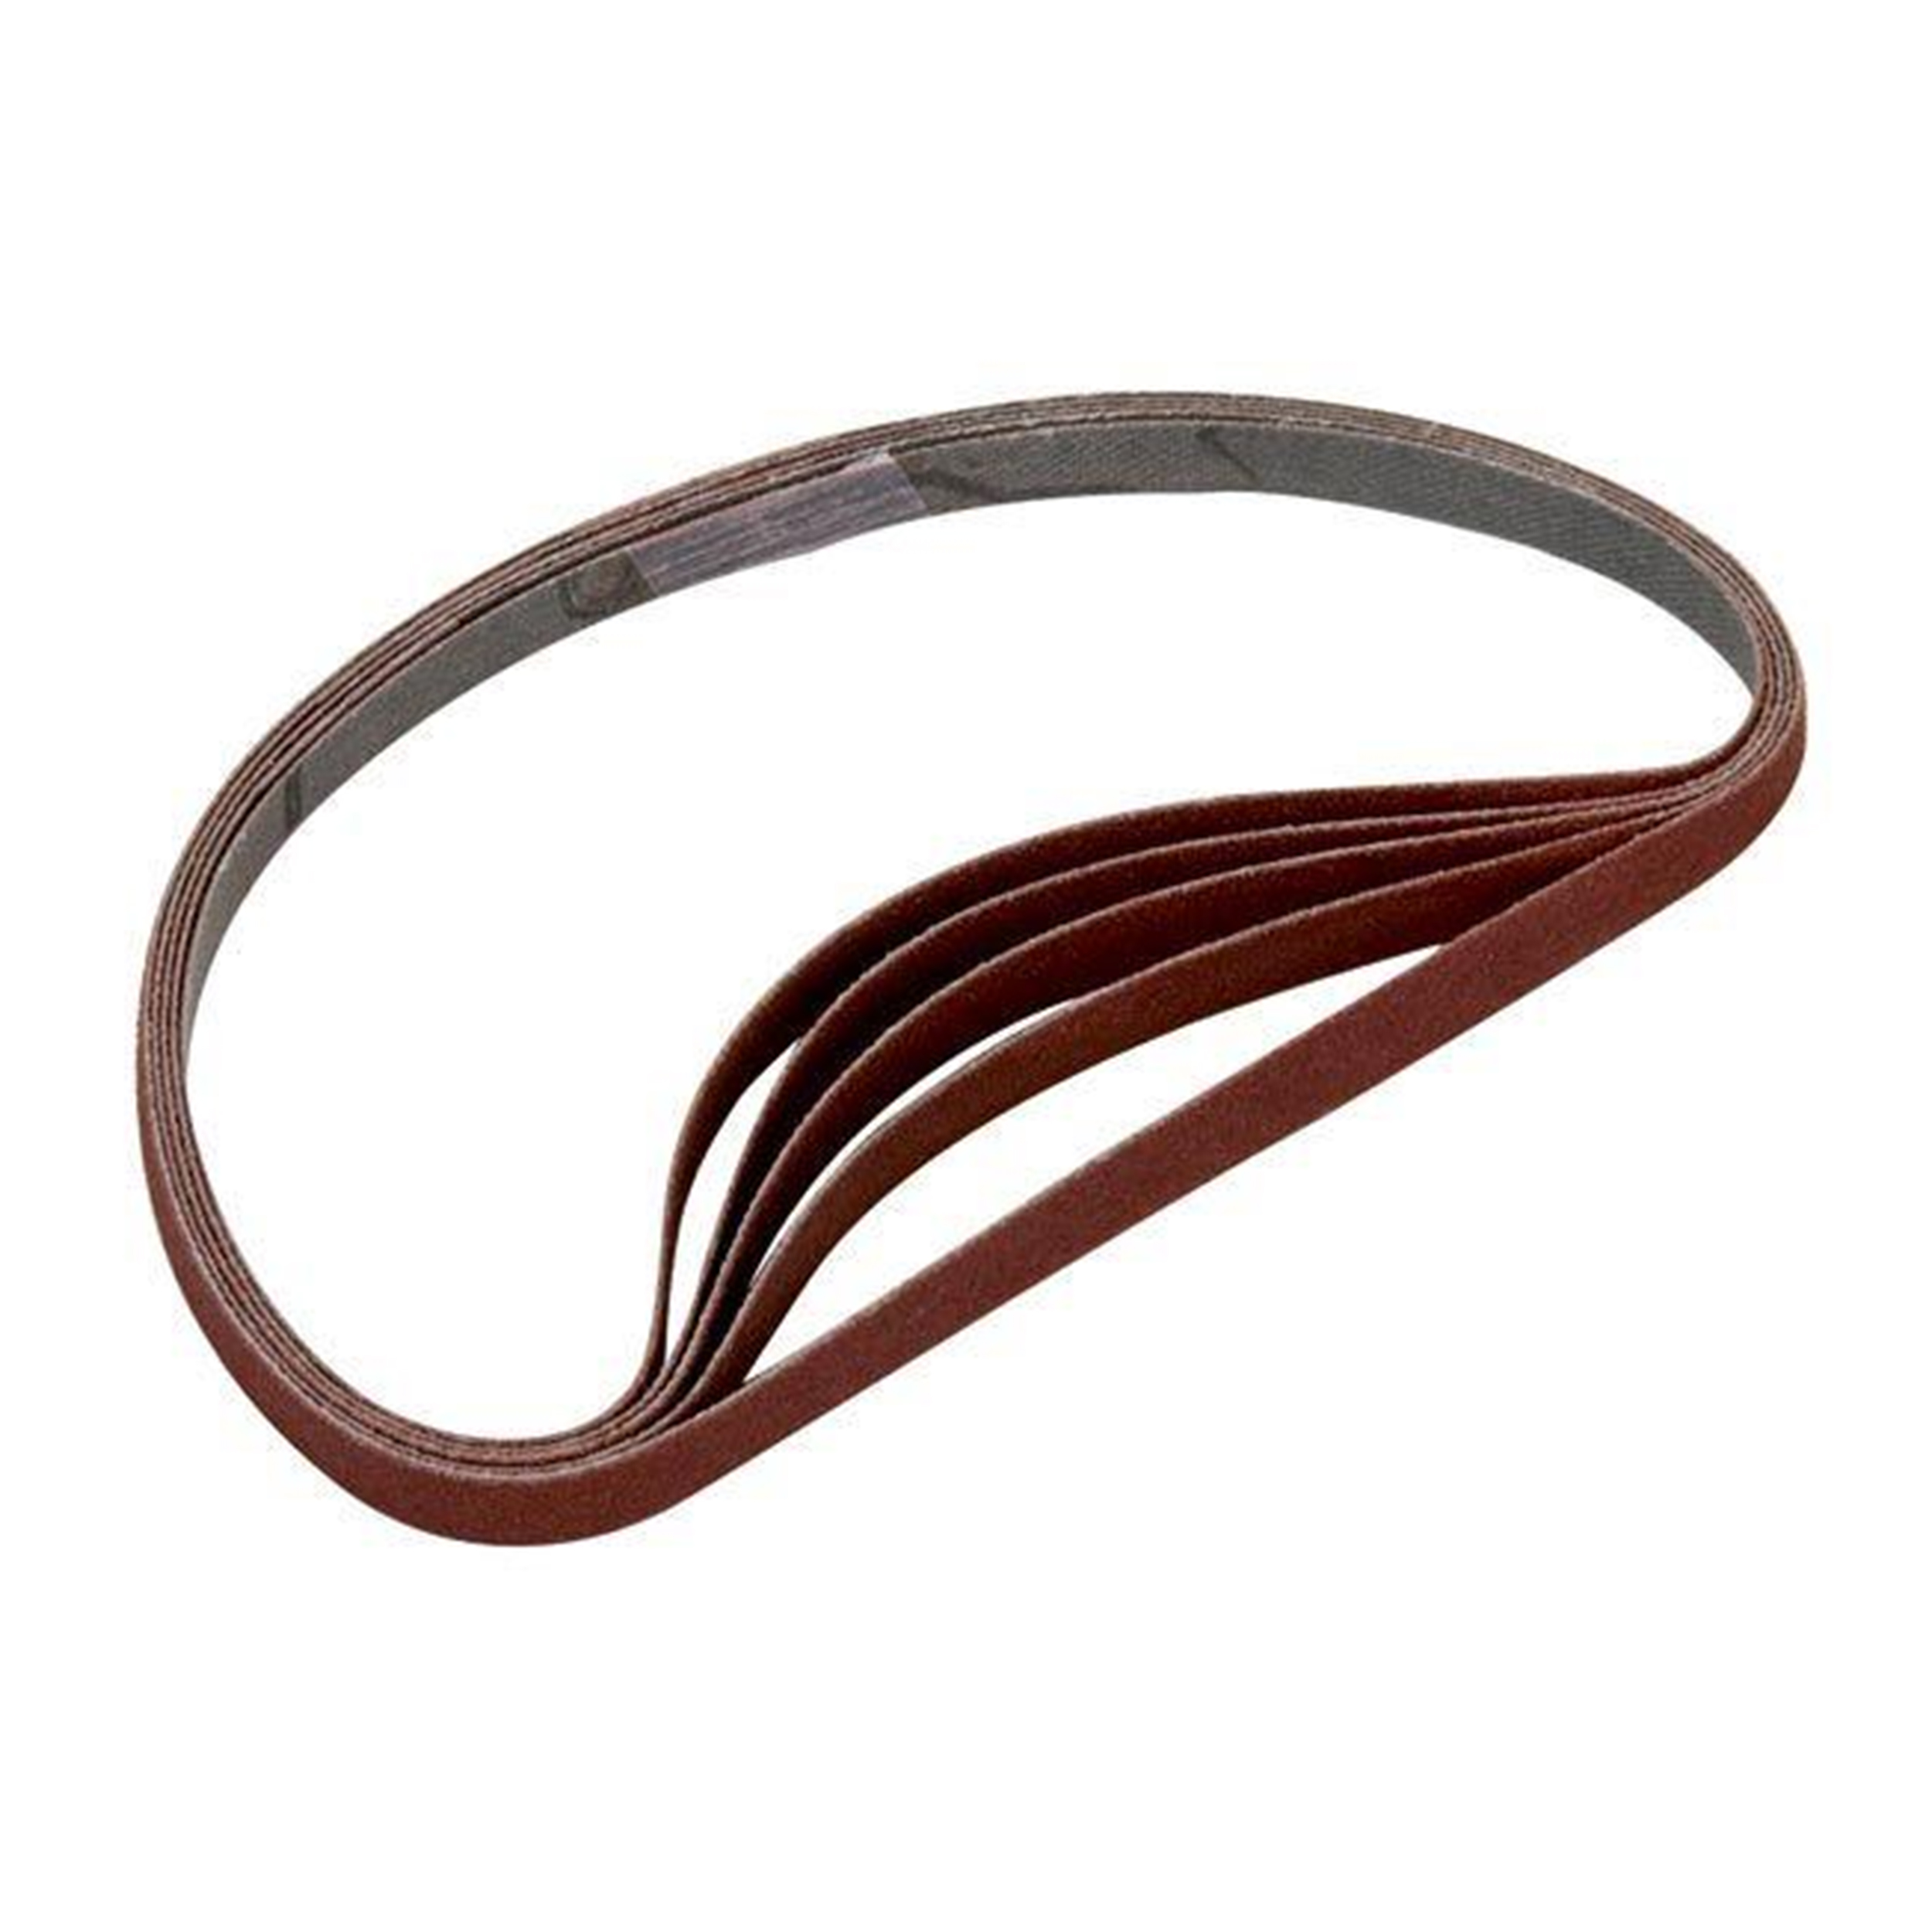 Sanding Stick Replacement Belts, 320 Grit, 5 Pack